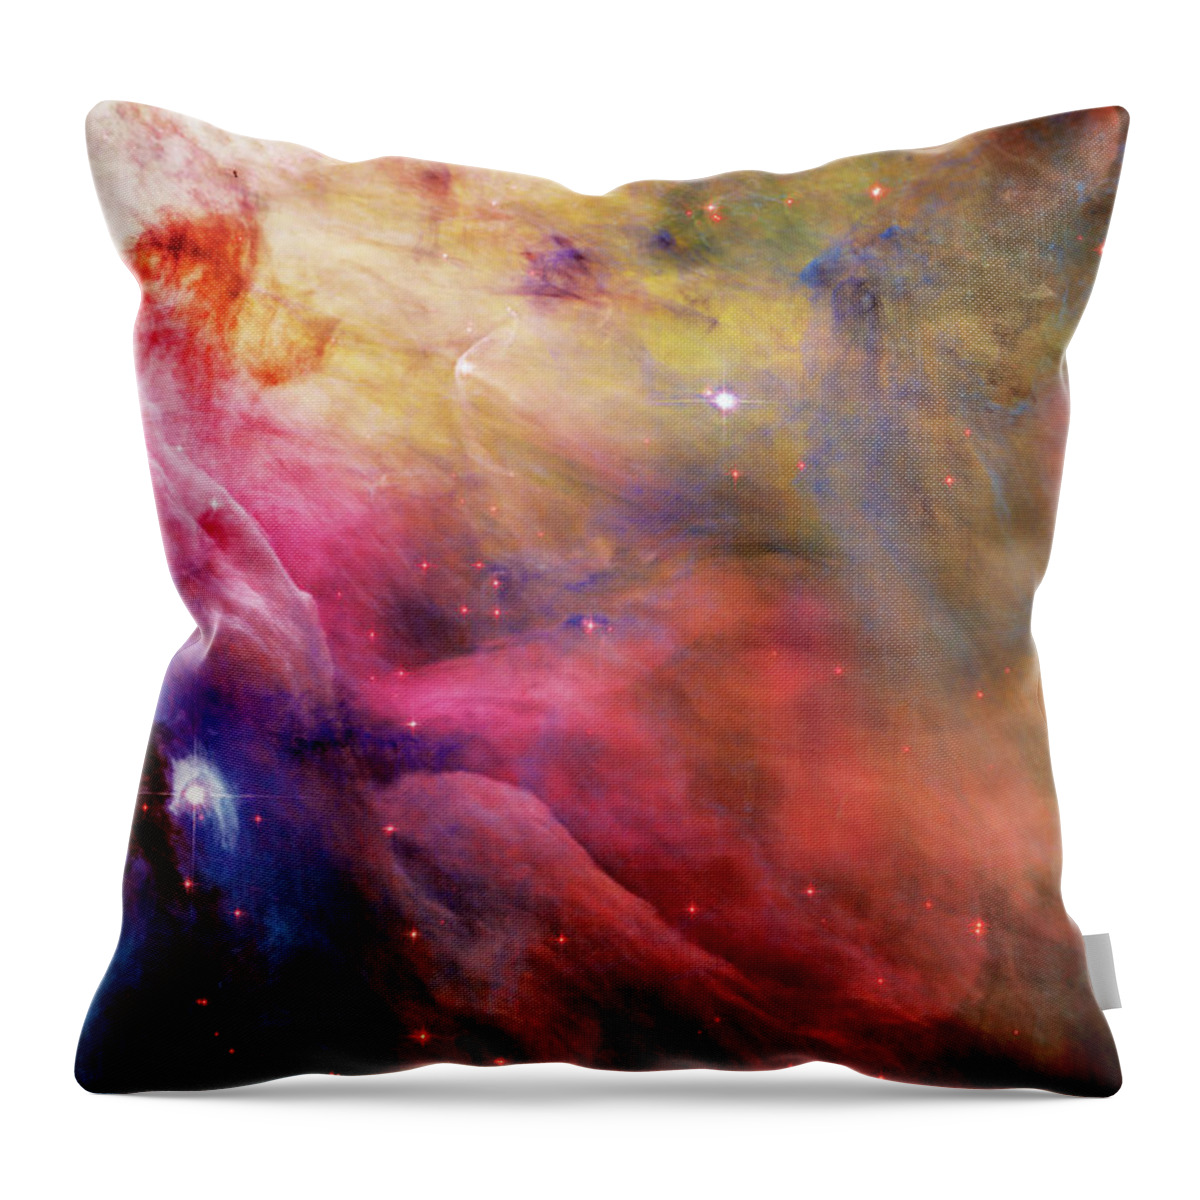 Nebula Throw Pillow featuring the photograph Warmth - Orion Nebula by Jennifer Rondinelli Reilly - Fine Art Photography